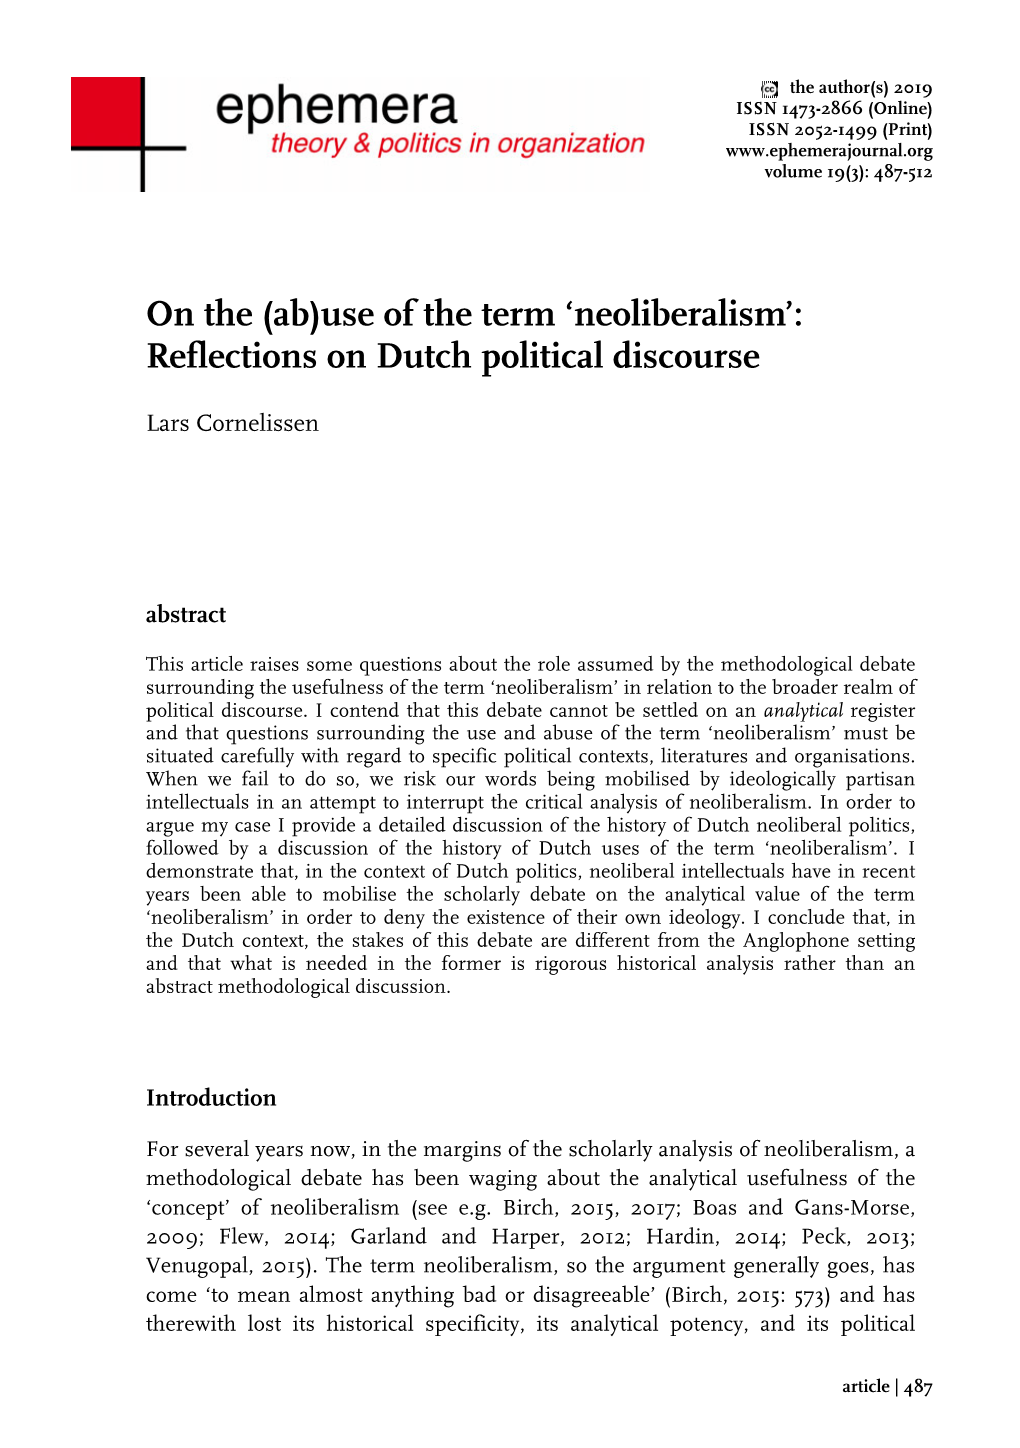 Neoliberalism’: Reflections on Dutch Political Discourse